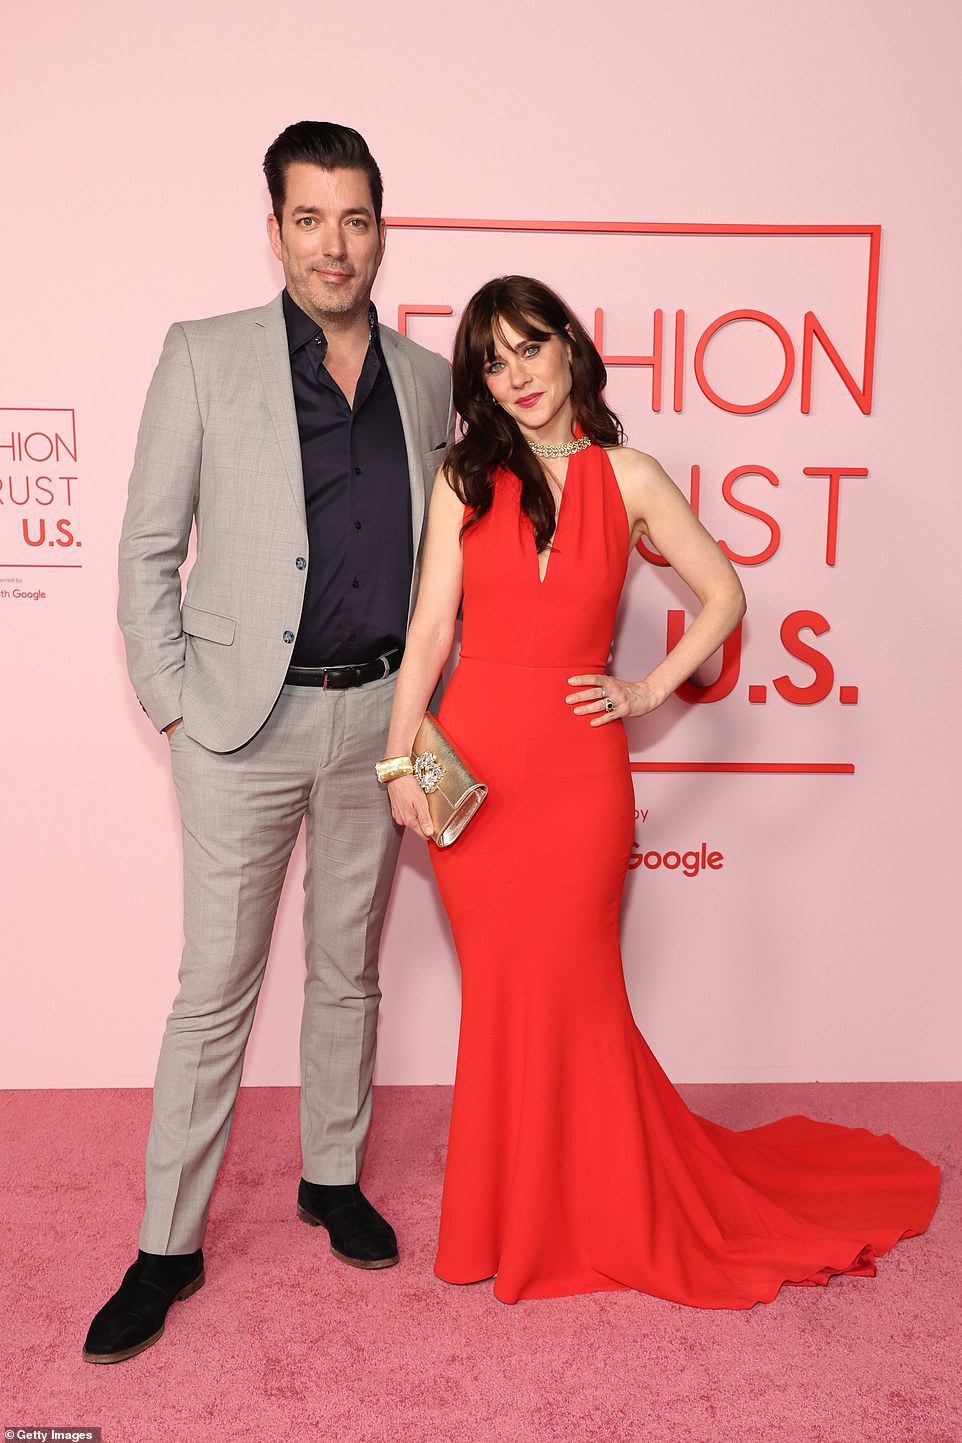 The star-studded event was hosted by actress Zooey Deschanel, 44, who was joined by partner Jonathan Scott, 45